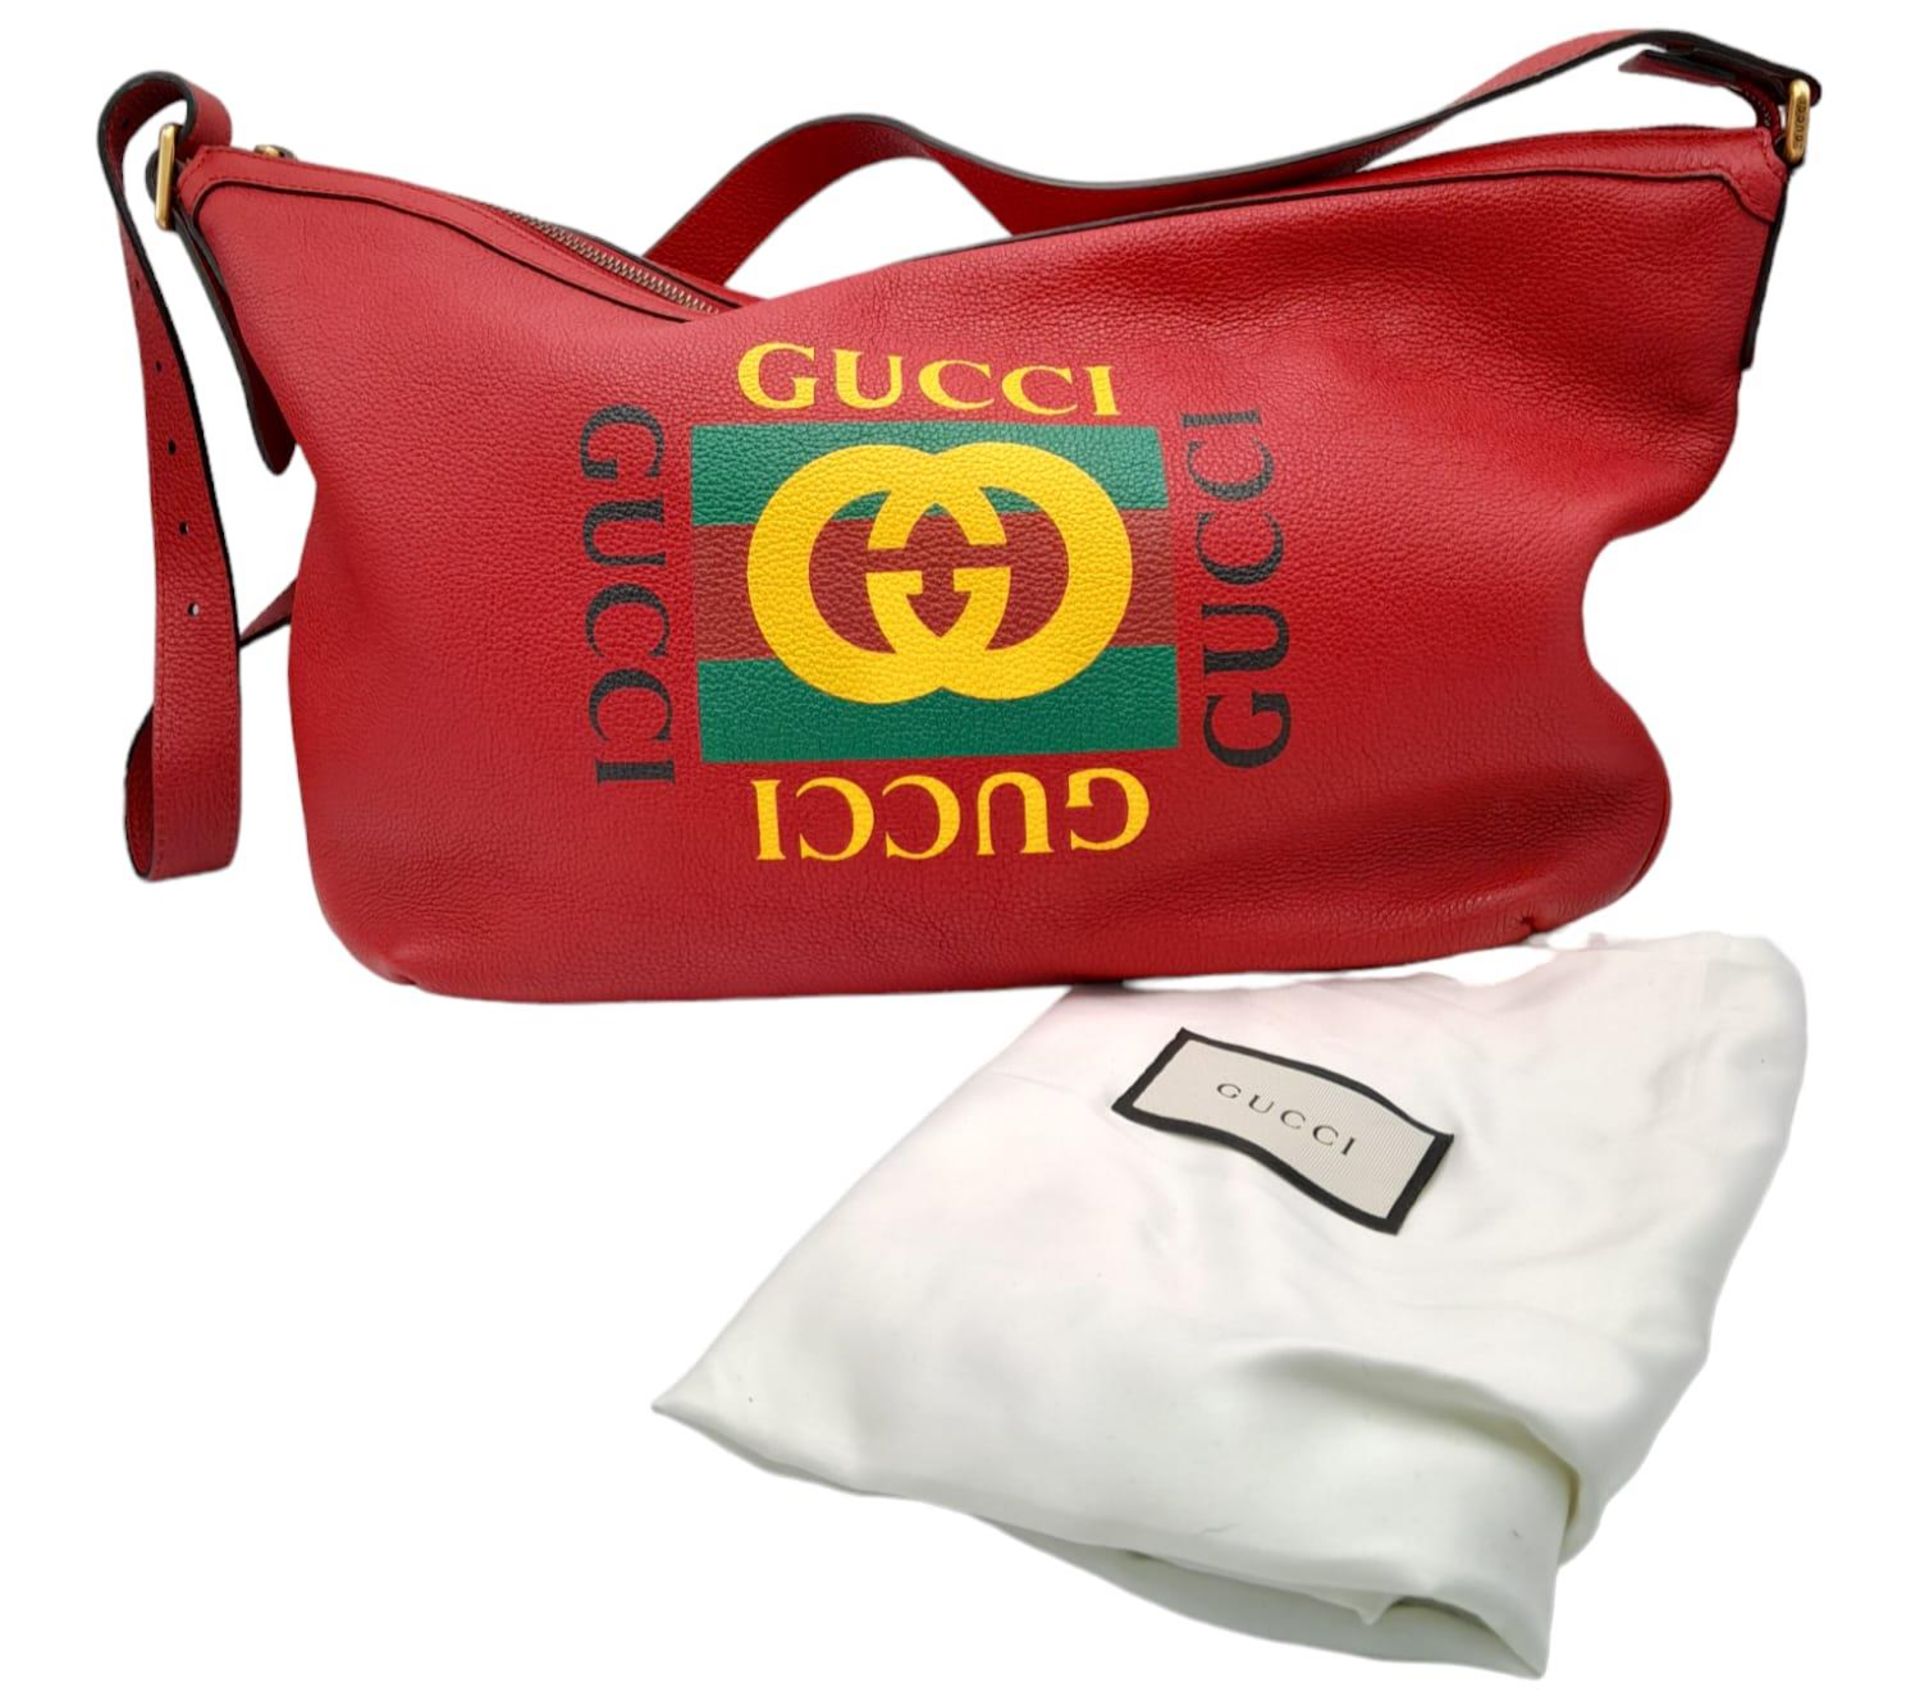 A Gucci Red Logo Shoulder Bag. Leather exterior with gold-toned hardware, adjustable strap and - Image 2 of 9